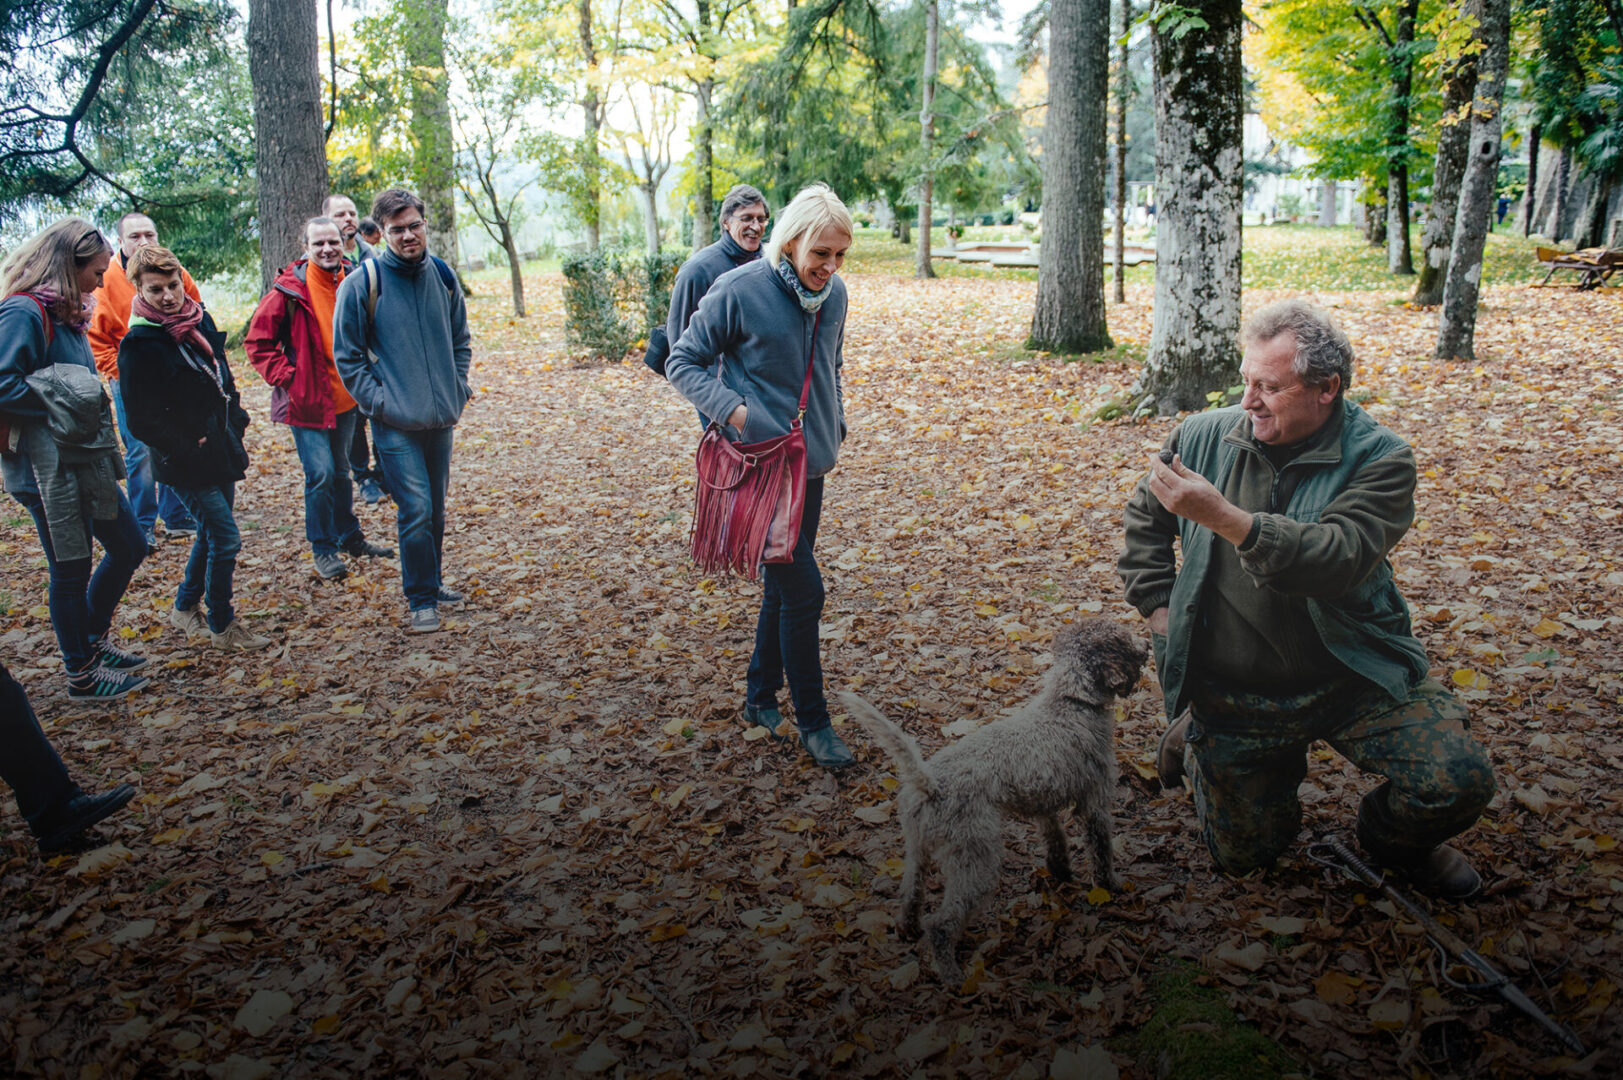 A group of people walking in the woods with a dog.